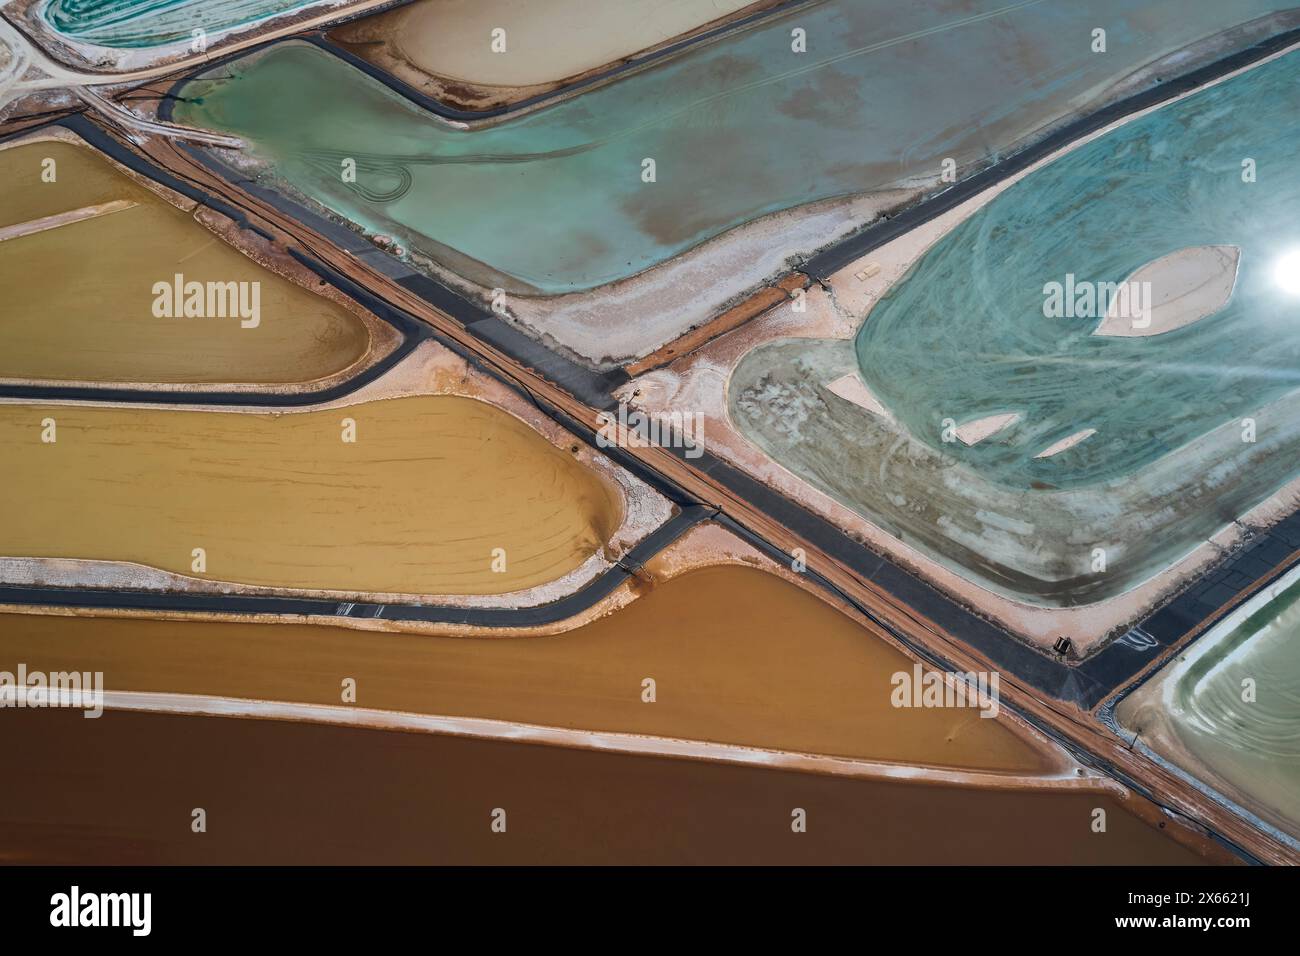 Colorful evaporation ponds at a potash refinery make an abstract Stock Photo